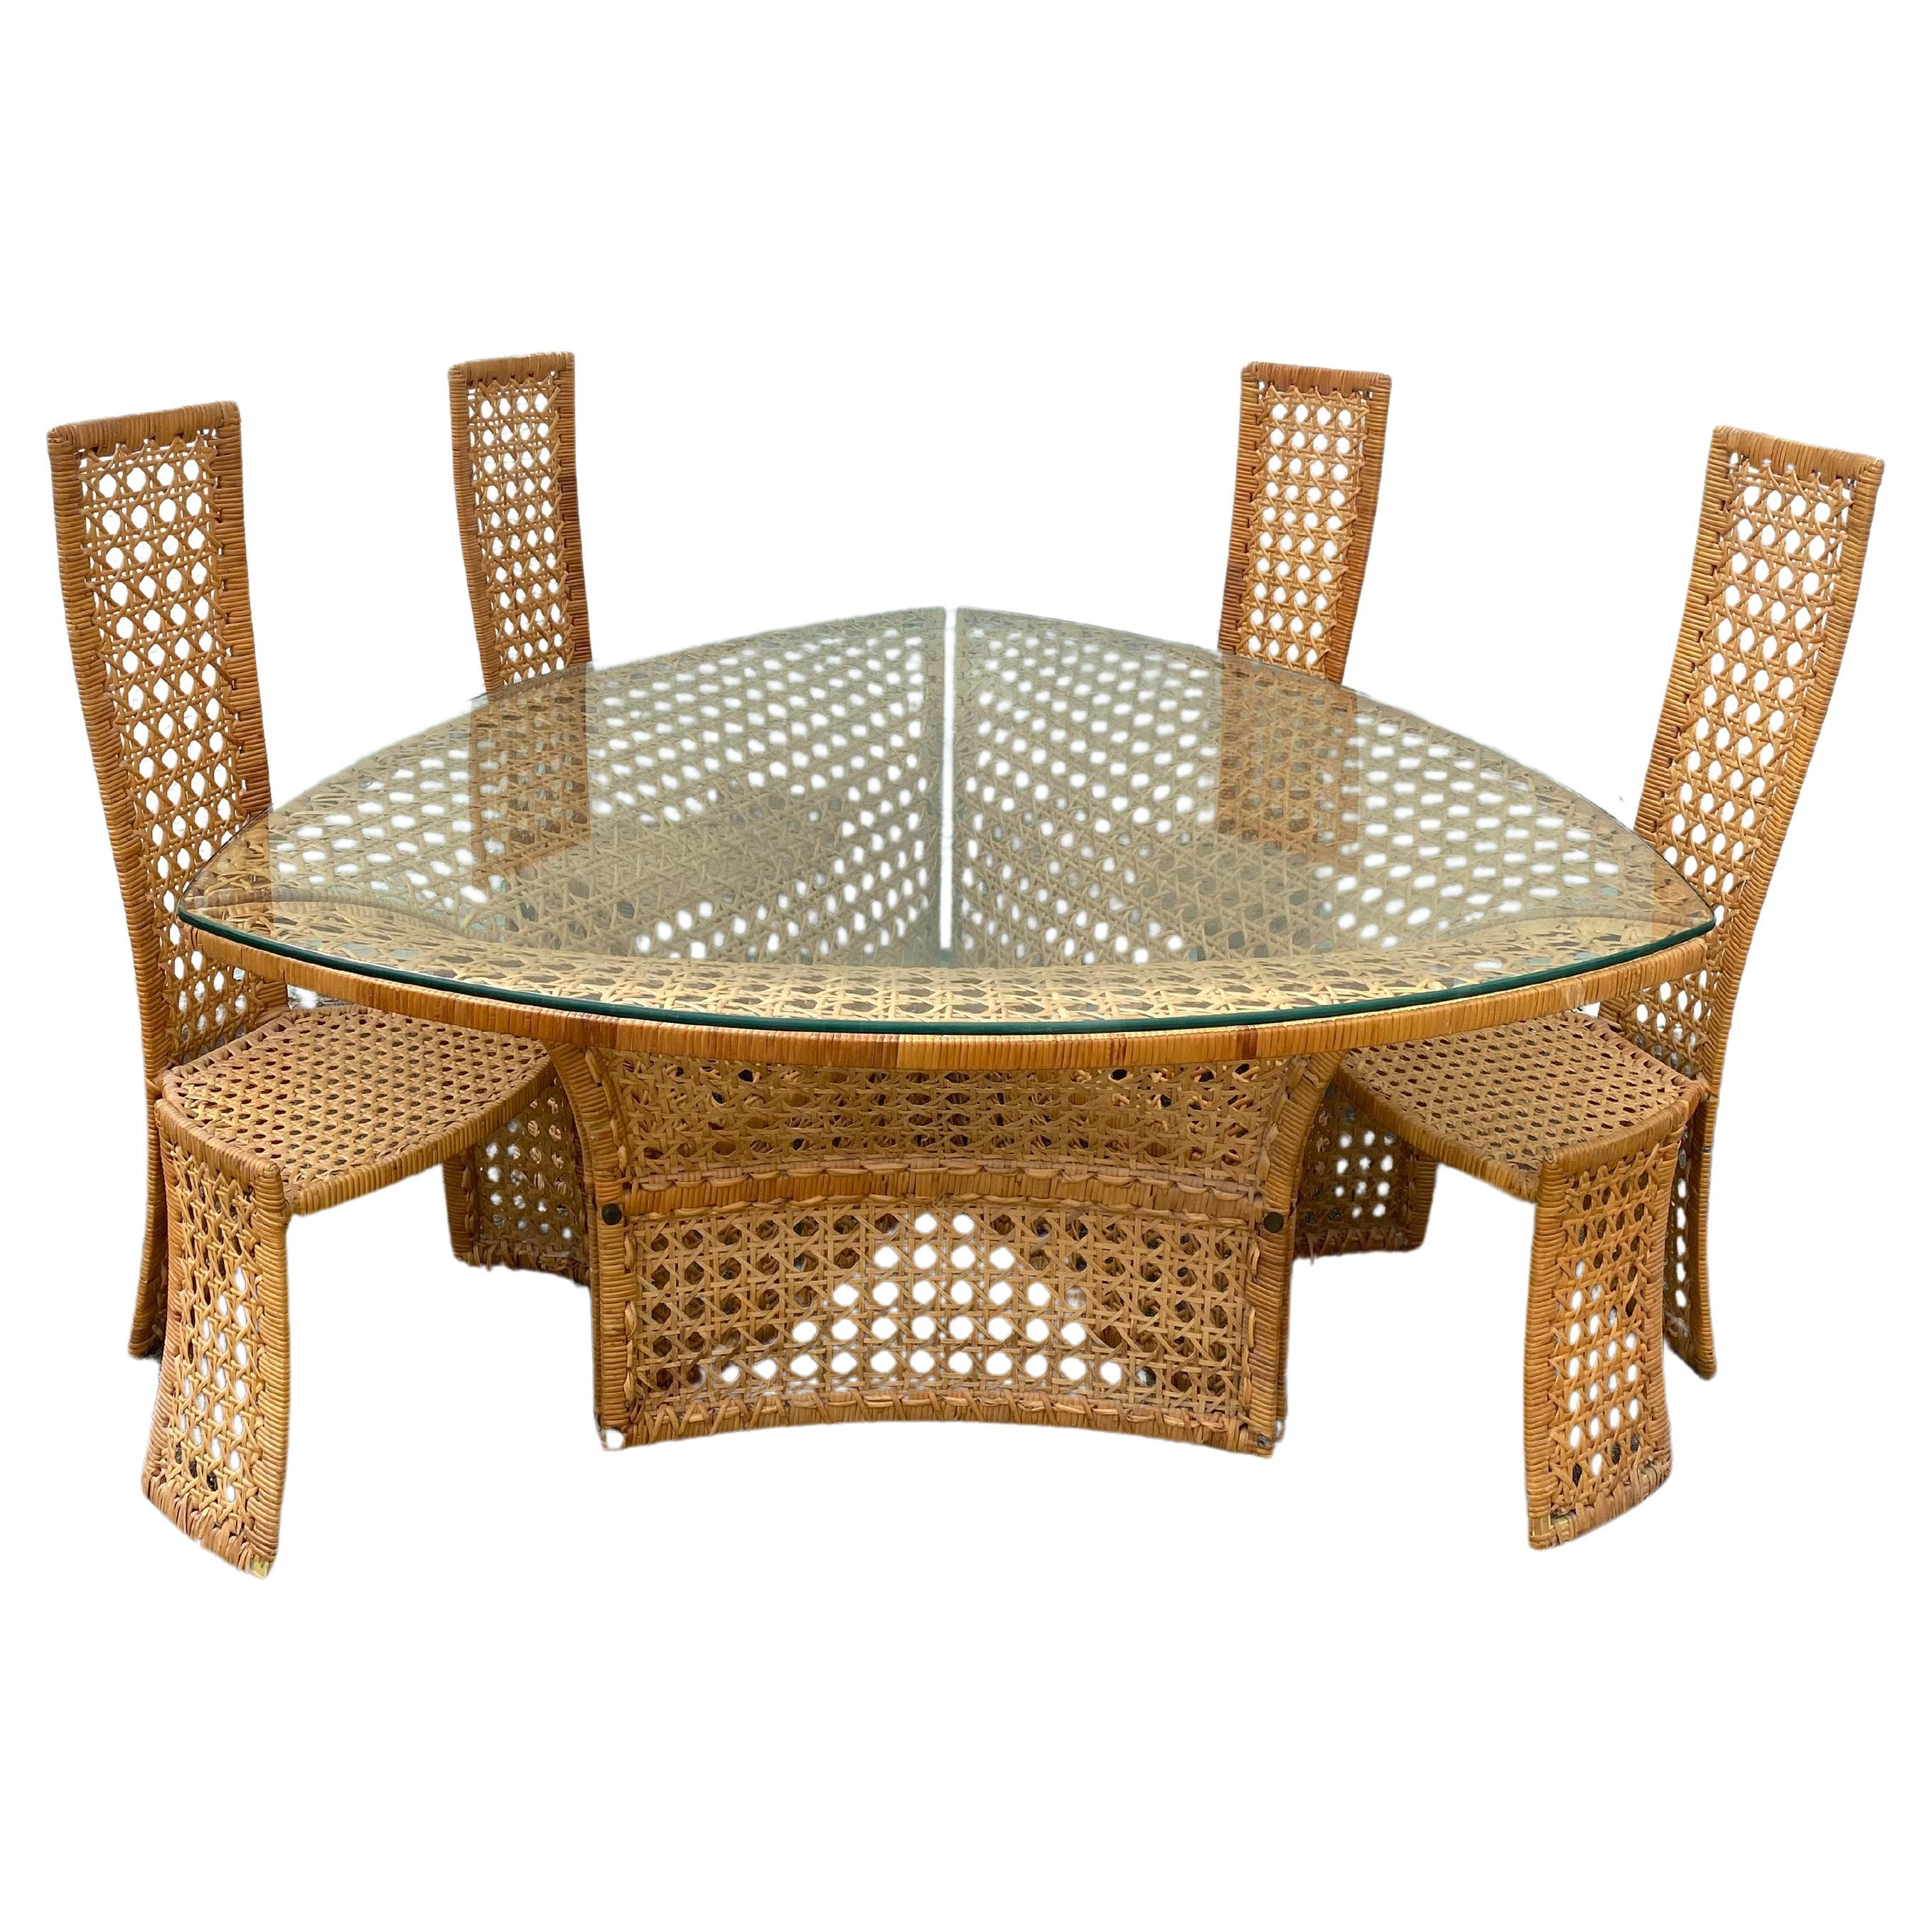 1970s Danny Ho Sculptural Rattan Dining Table and Chairs, Set of 5